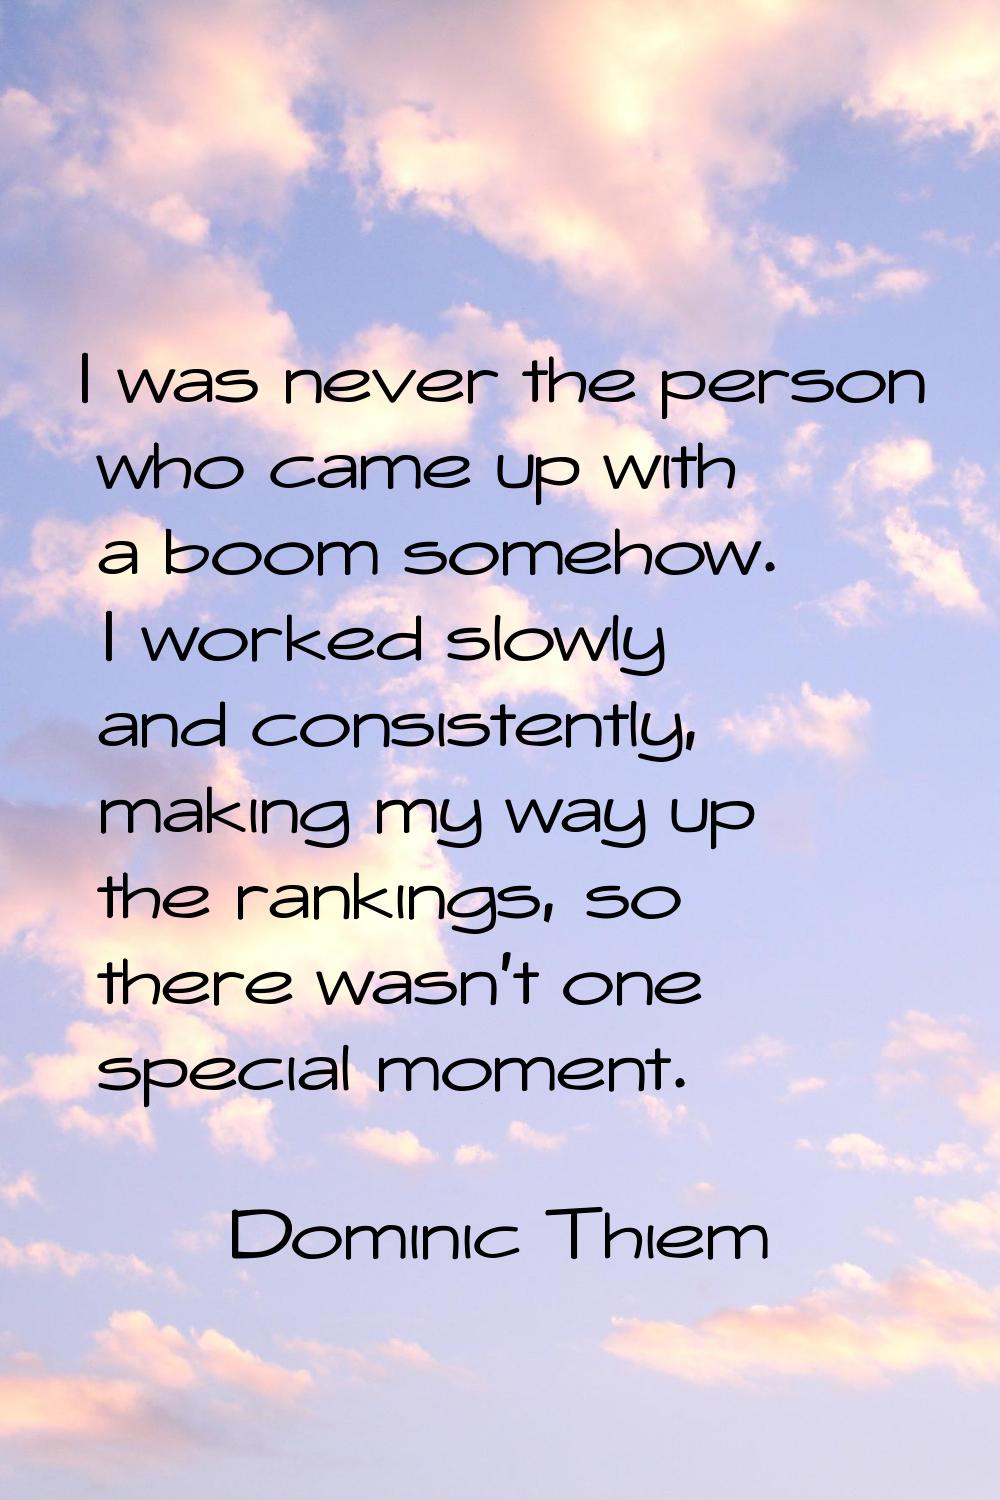 I was never the person who came up with a boom somehow. I worked slowly and consistently, making my